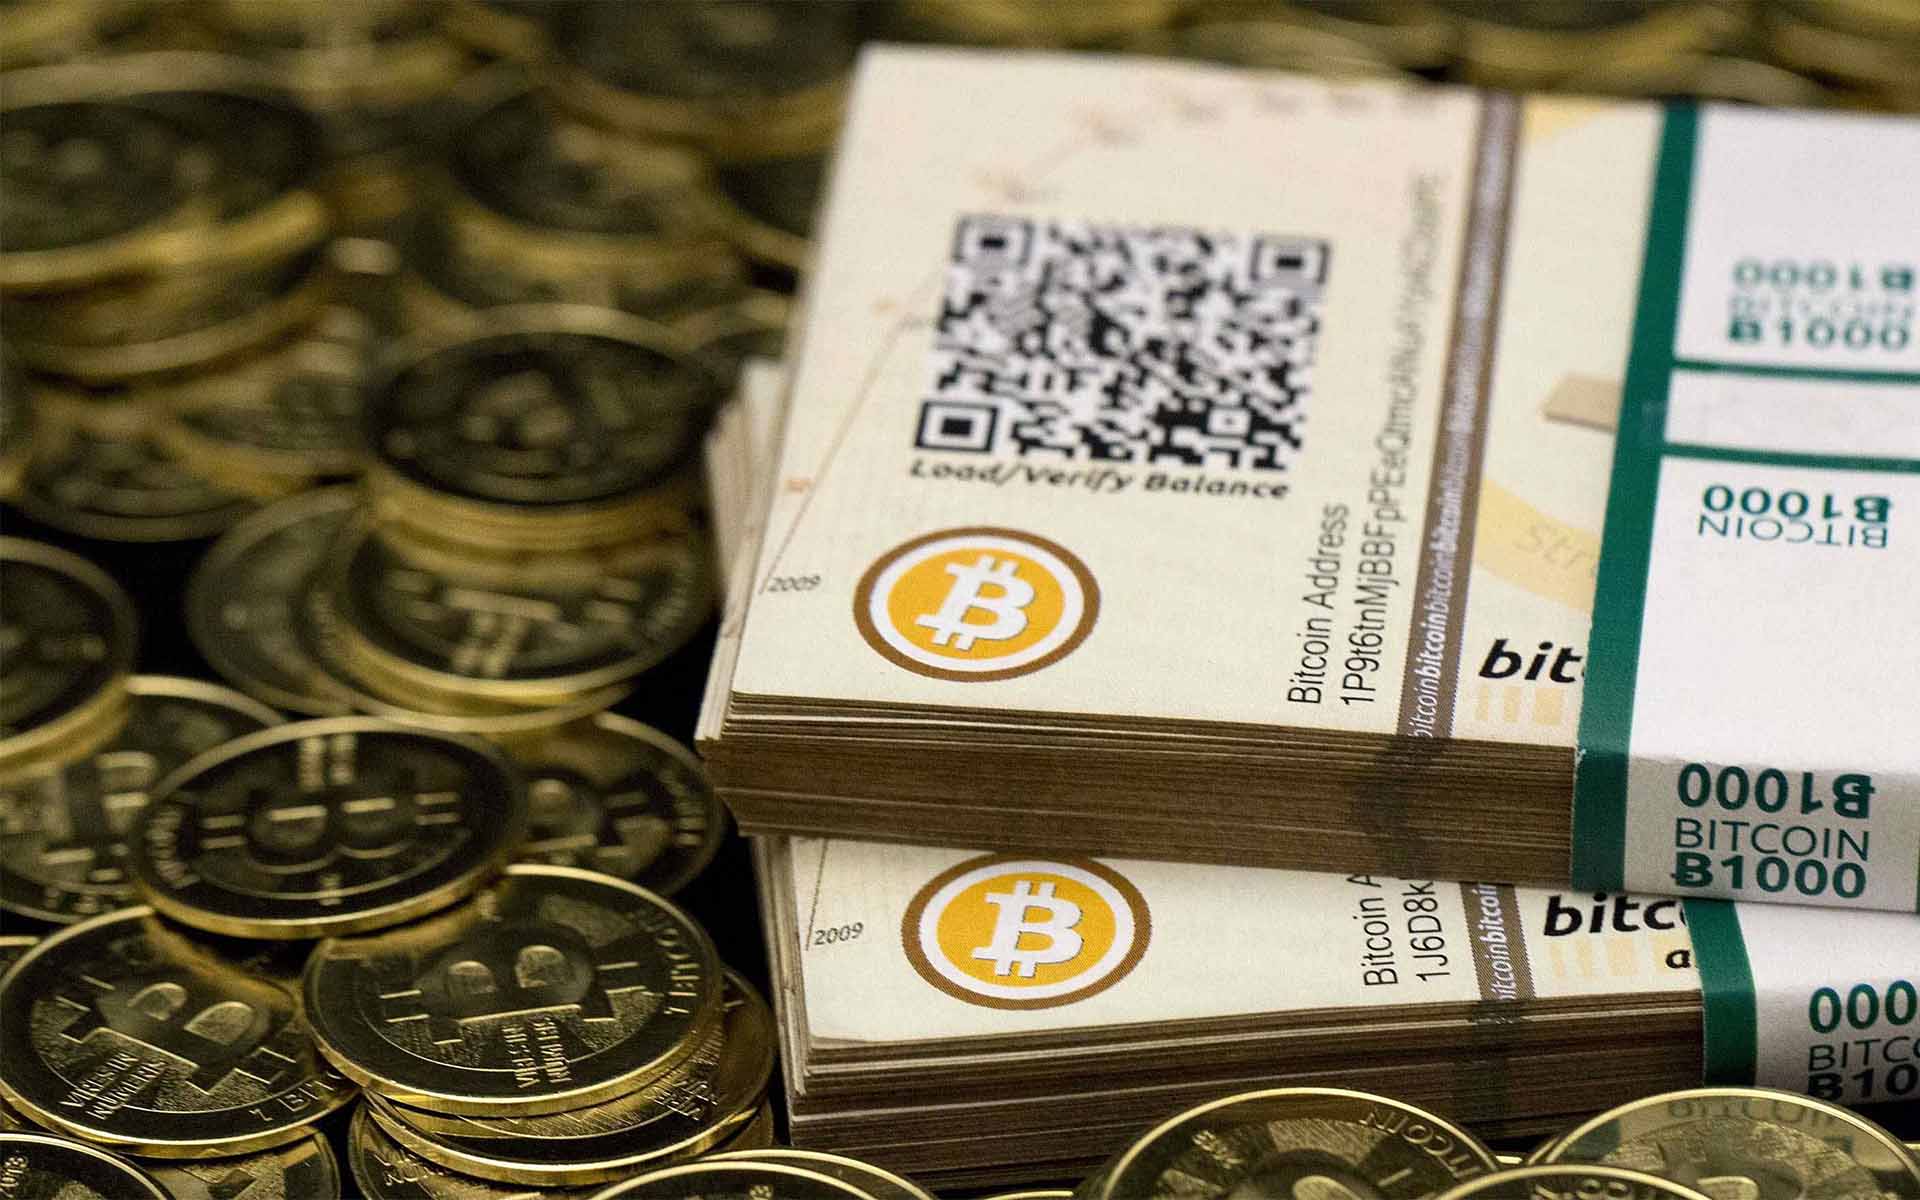 It’s Bitcoin Bonuses This Year for Some Wall Street Bankers and Traders